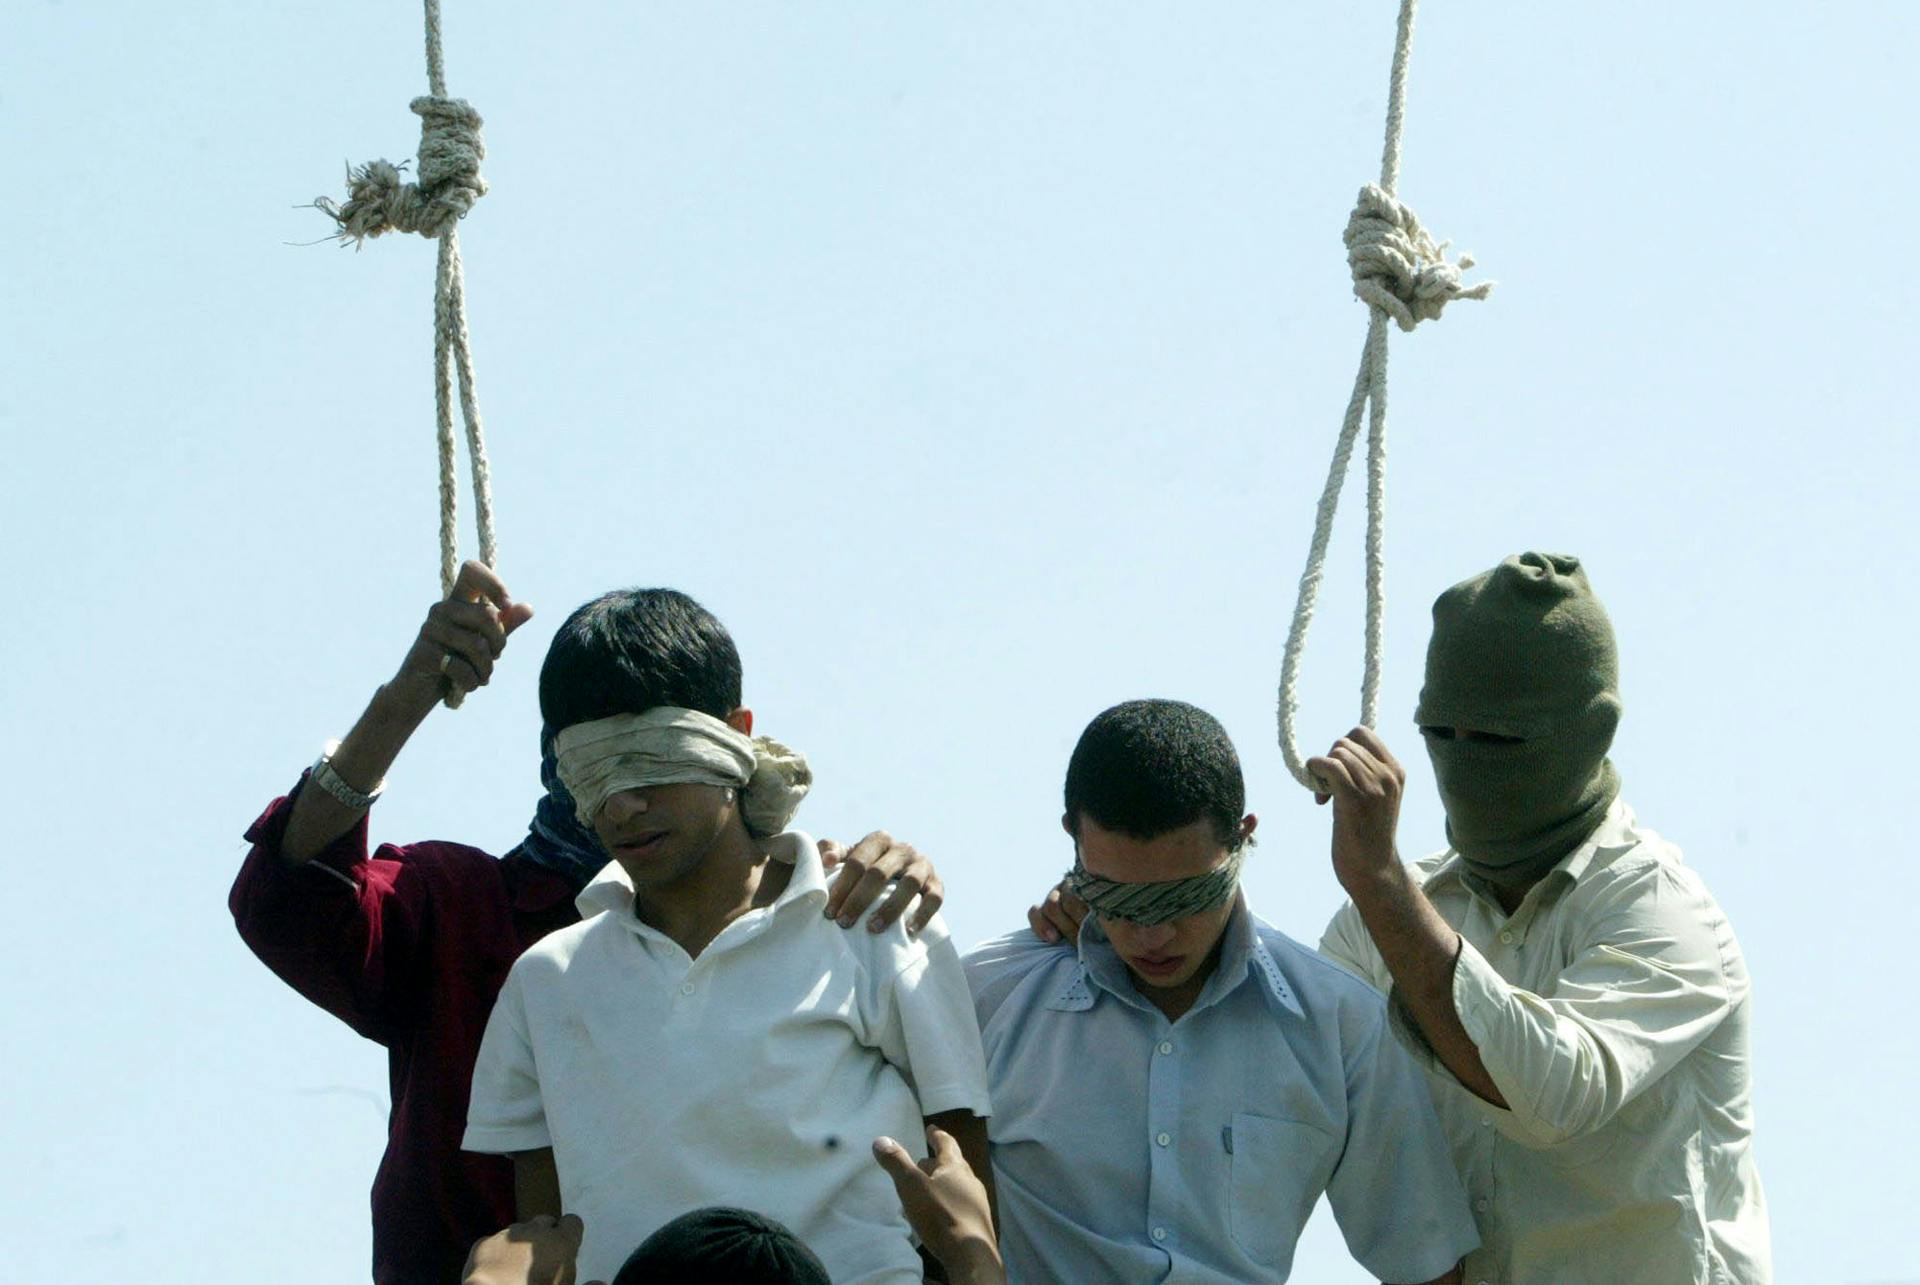  Iran Targets Ethnic Minority With 67 Executions In May